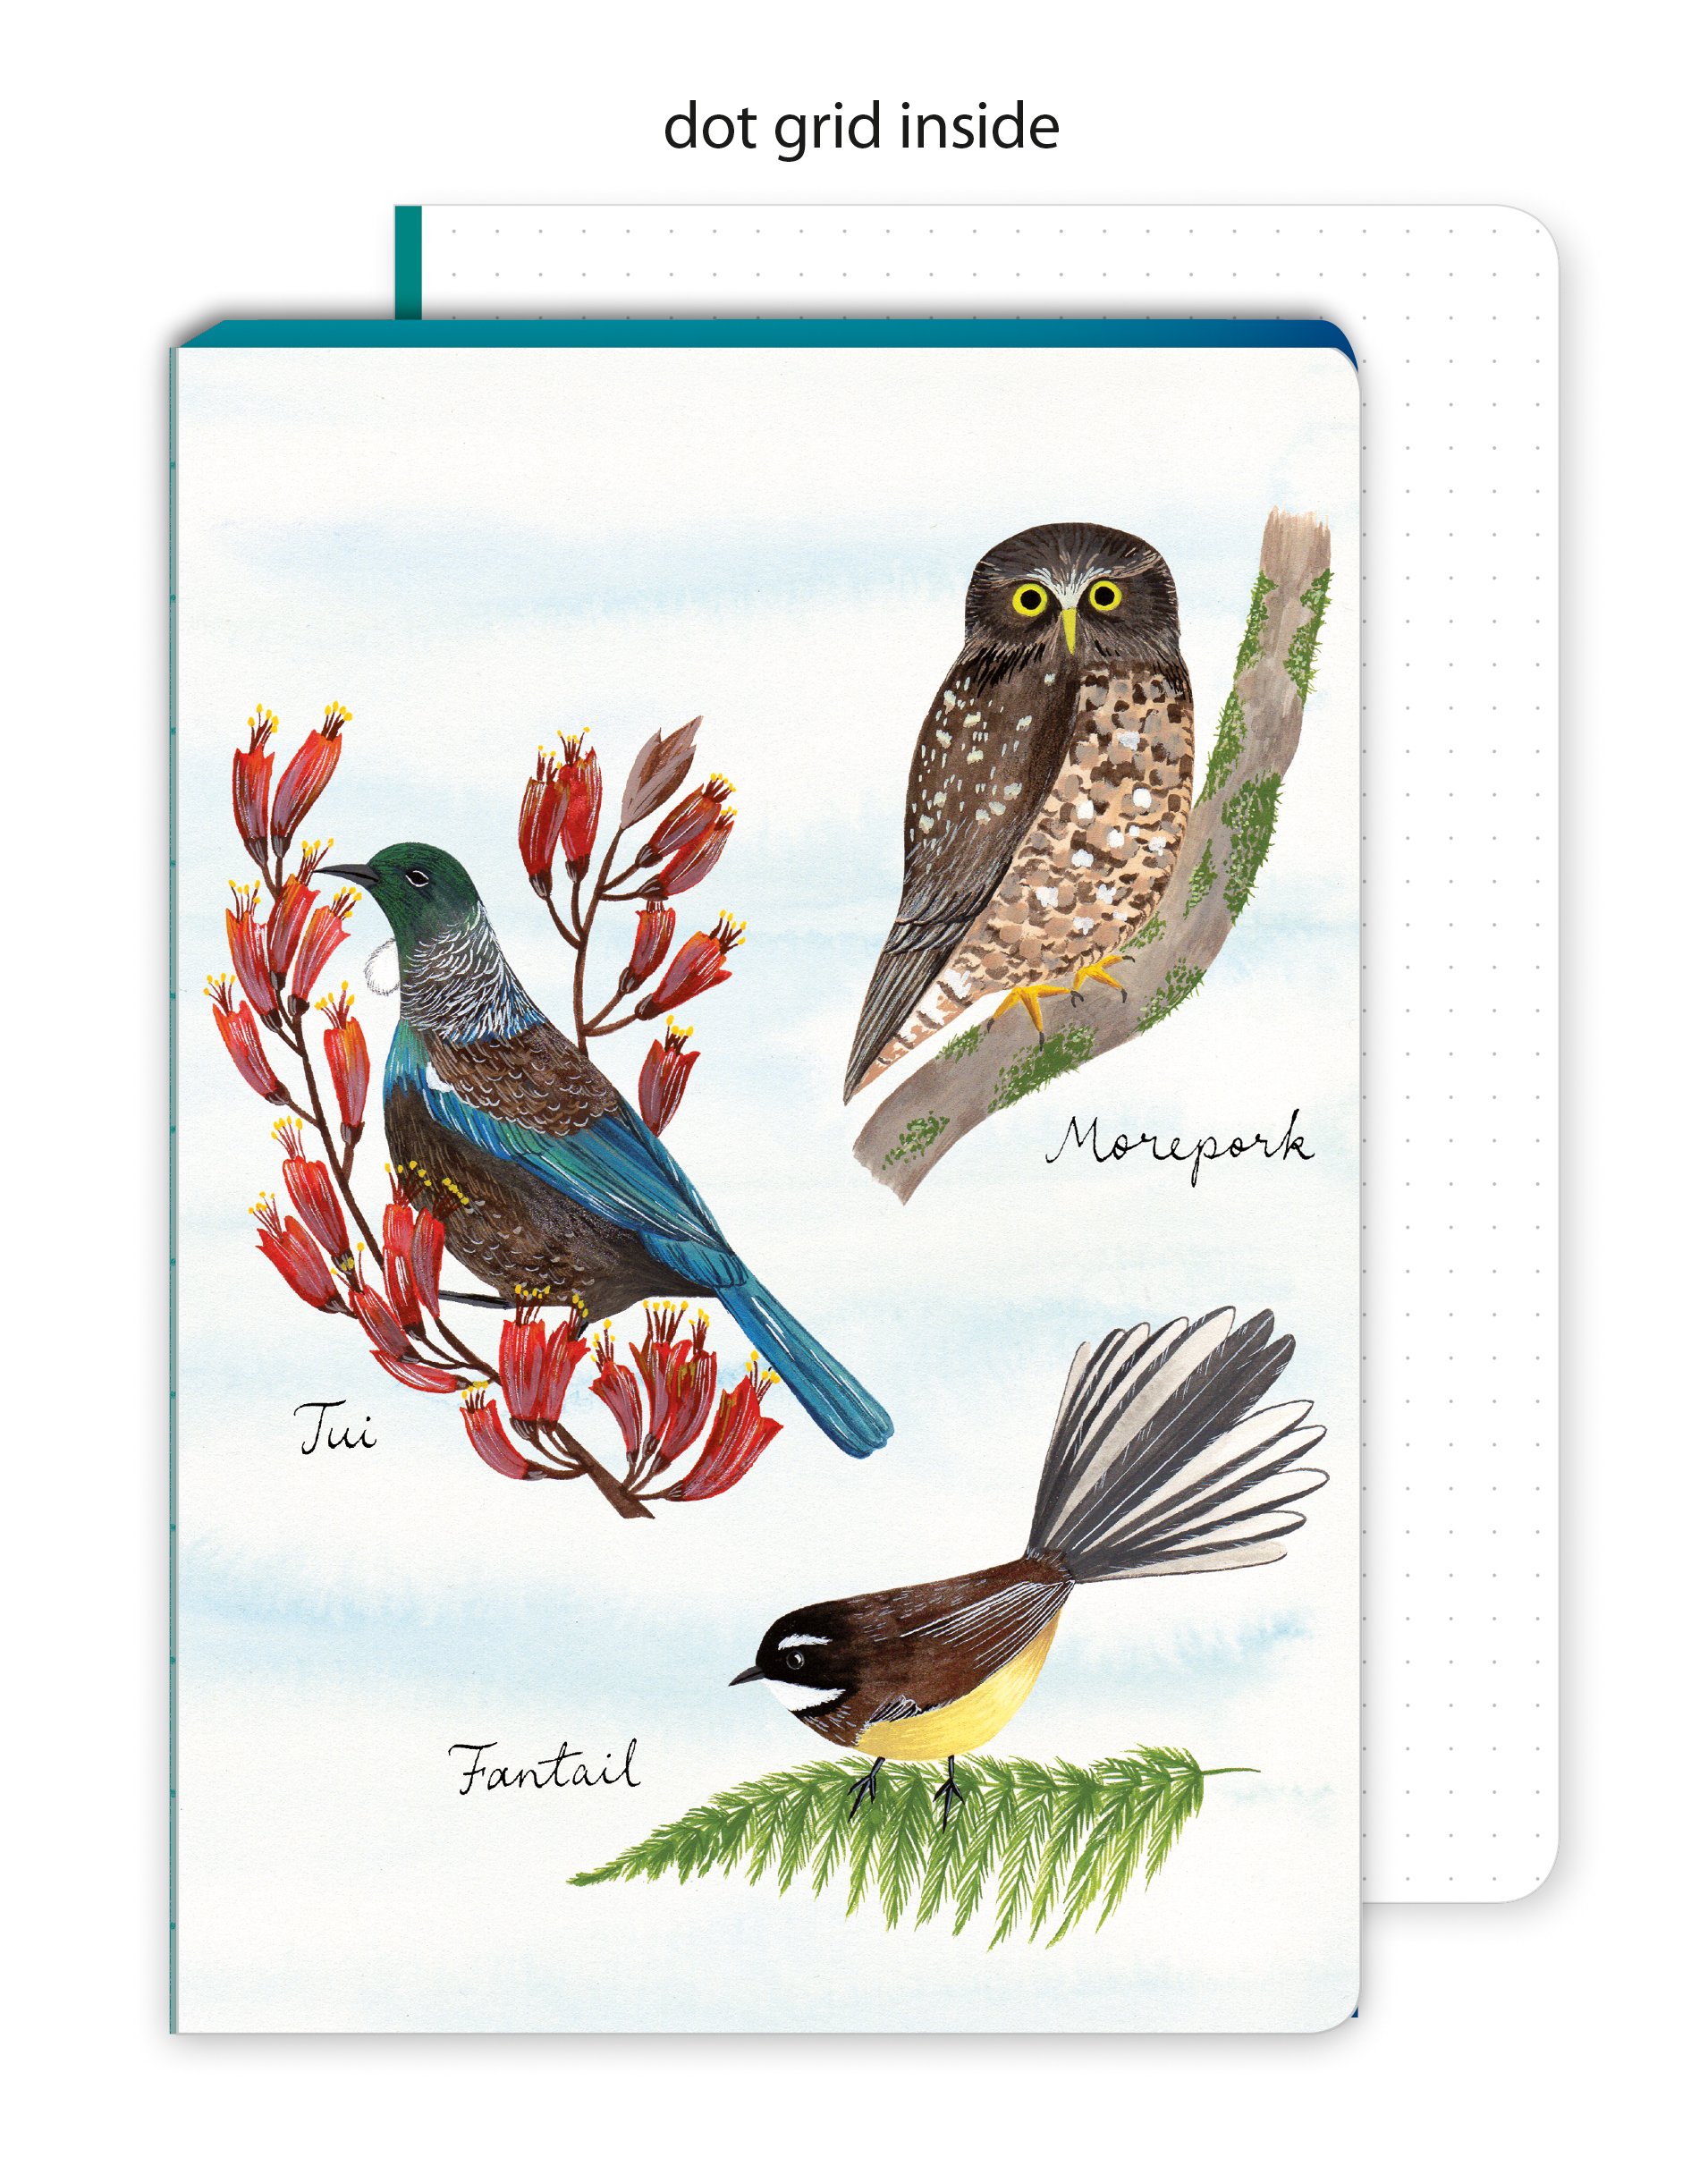 Three colourful hand drawn illustrations of birds native to New Zealand of a tui, a morepork owl and a fantail